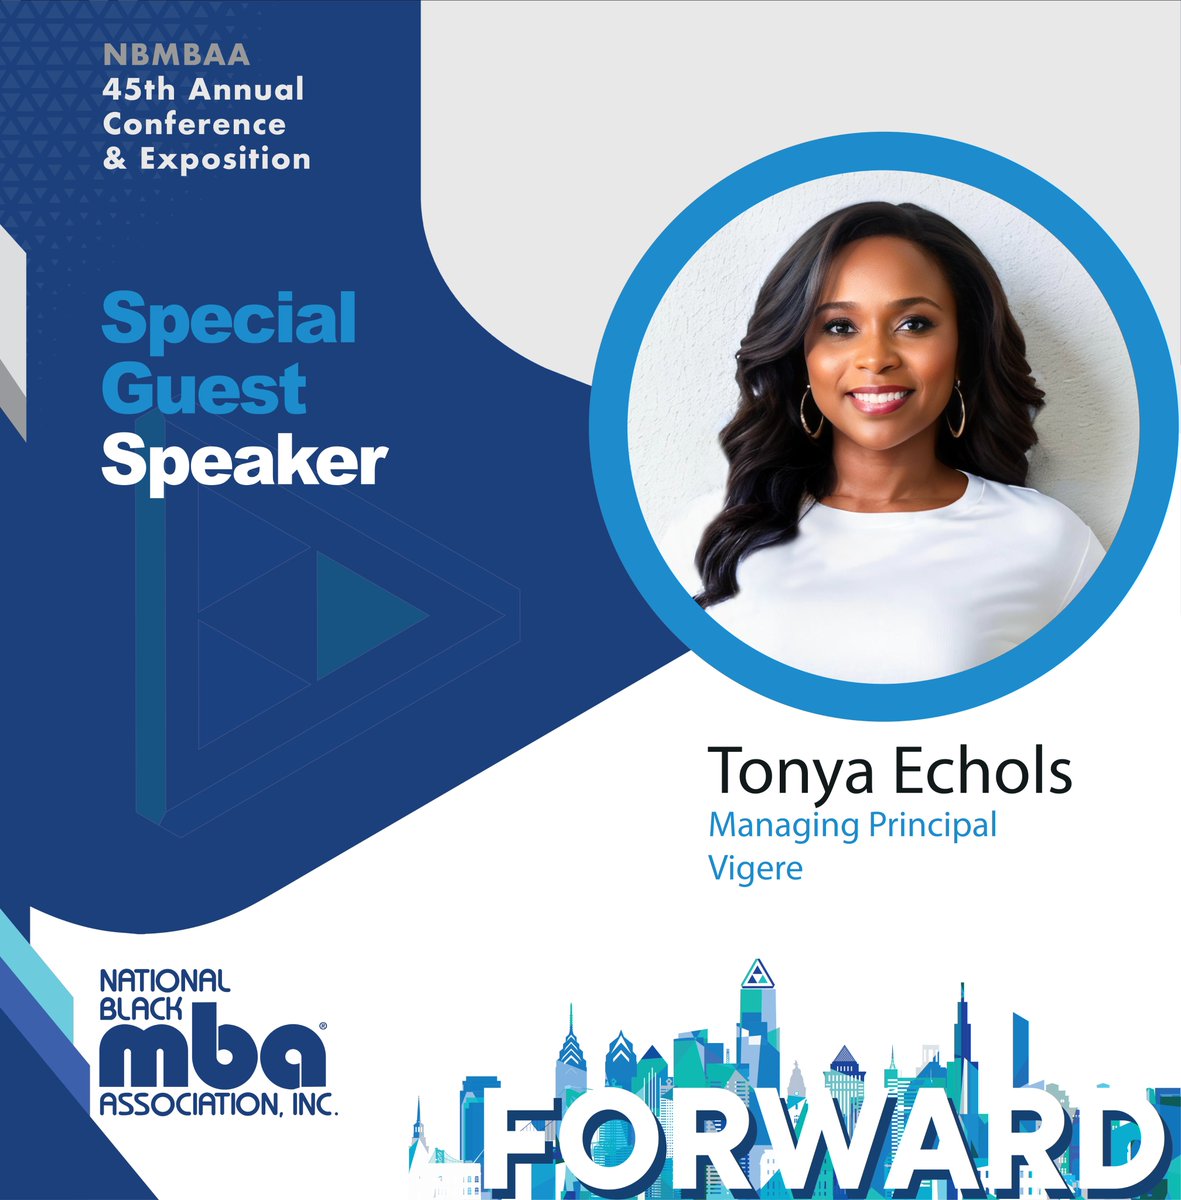 I am looking forward to speaking at the #NBMBAA 45th Annual Conference for the NBMBAA Leadership Institute®. National Black MBA Association #Forward2023 brings together more than 10,000 professionals for four days of education, career development, and networking in Philadelphia,